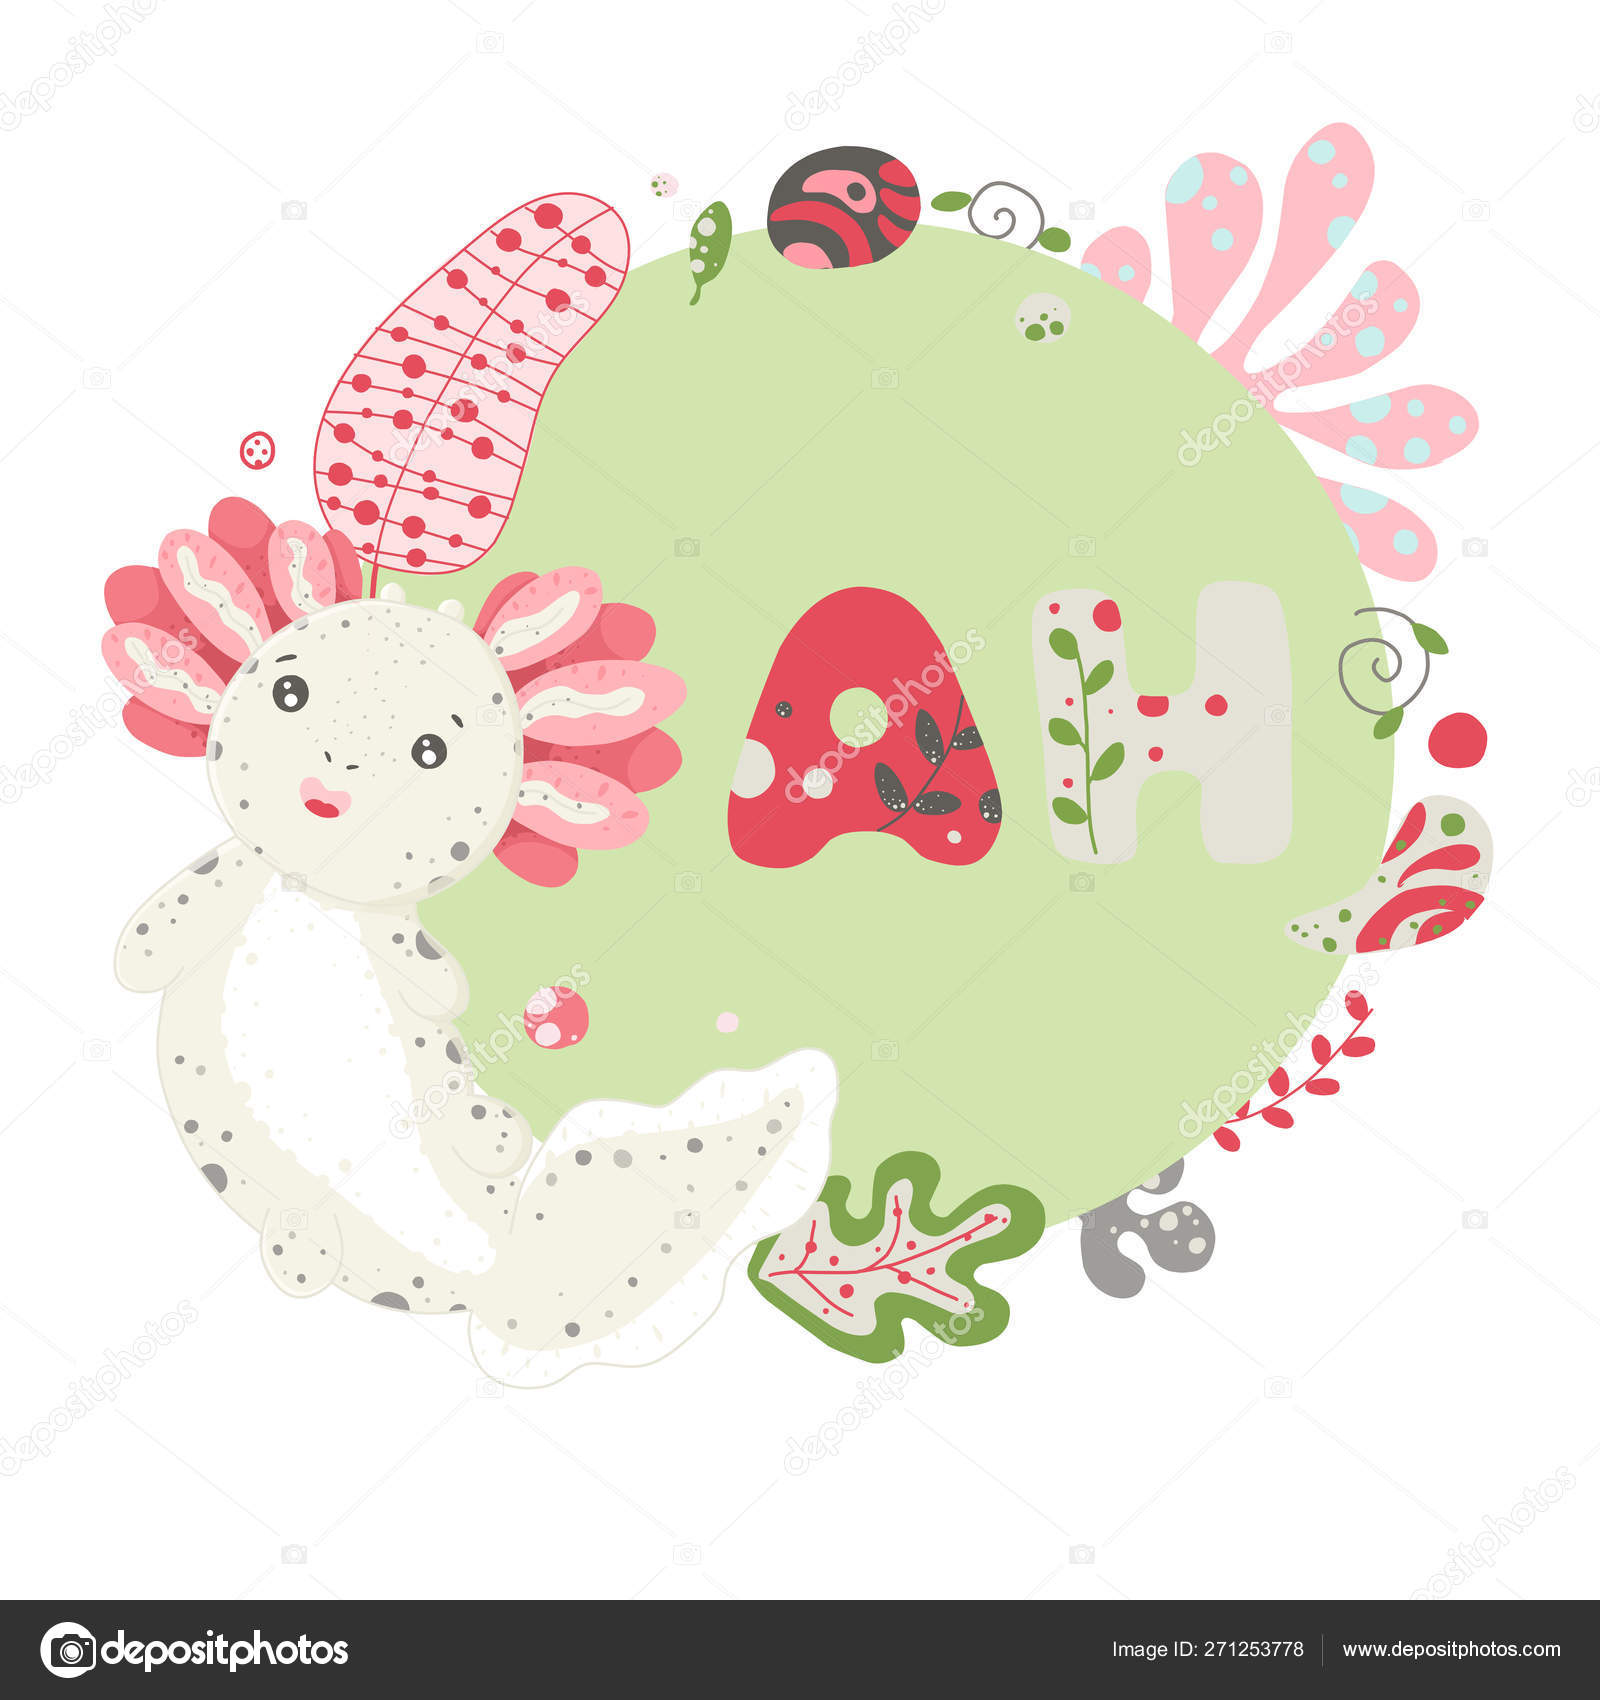 Cute Kawaii Axolotl Baby Amphibian Drawing Cute Frame Background With Elements Of Flora Leaves Flowers Pebbles Lettering Psst Flat Style Design Ambystoma Mexicanum Vector Image By C Lviktoria25 Vector Stock